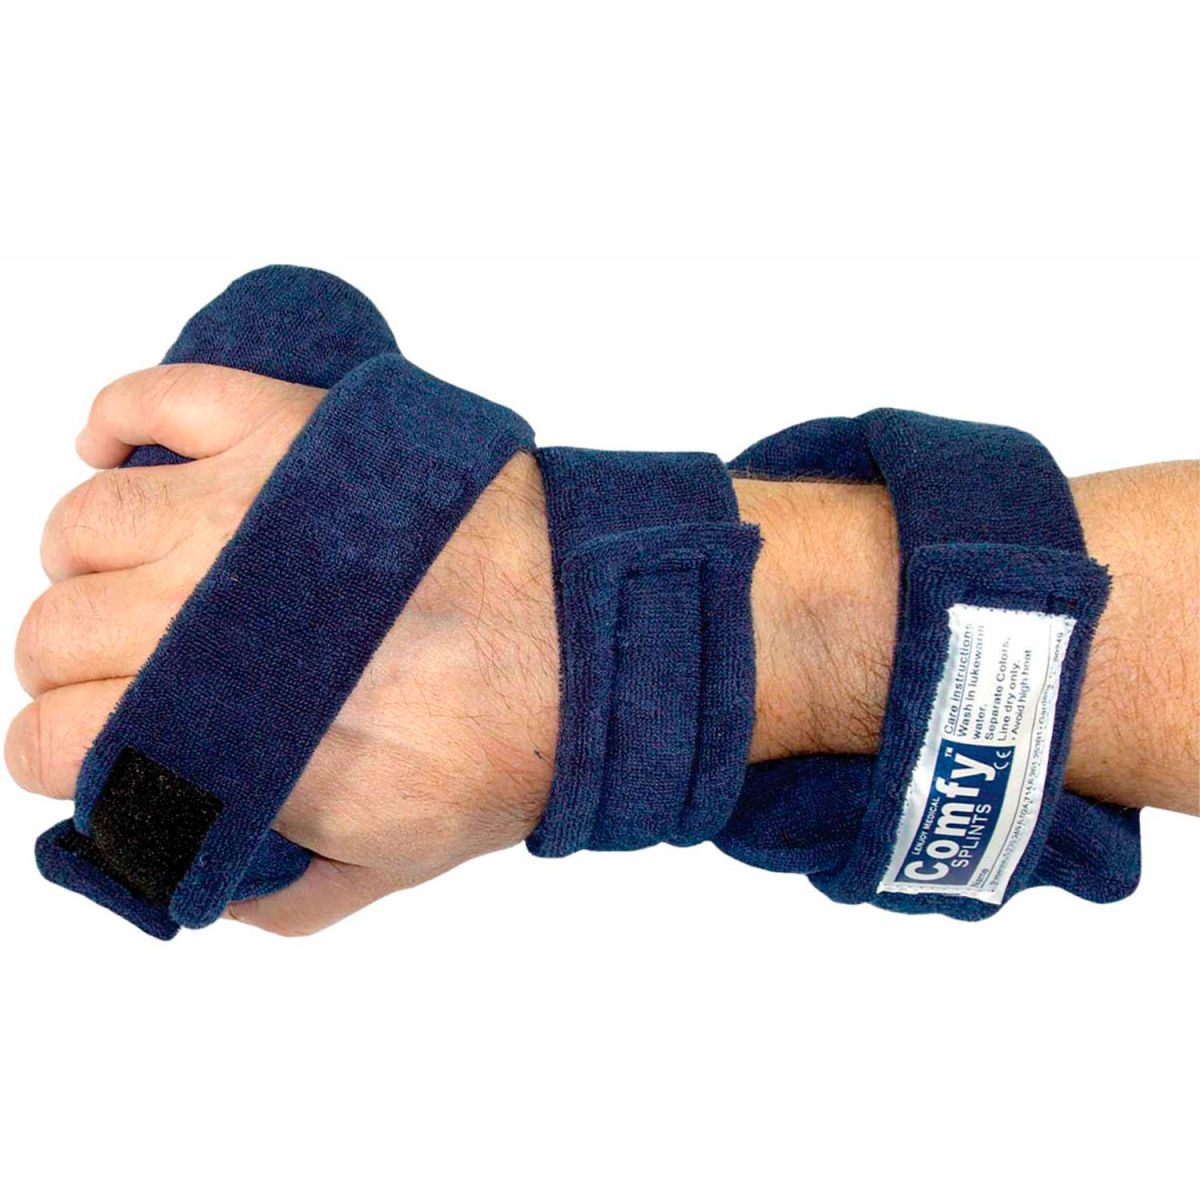 B2196830 Adult Medium Comfy Splints Comfy Hand & Thumb Orthosis with One Cover -  Fabrication Enterprises